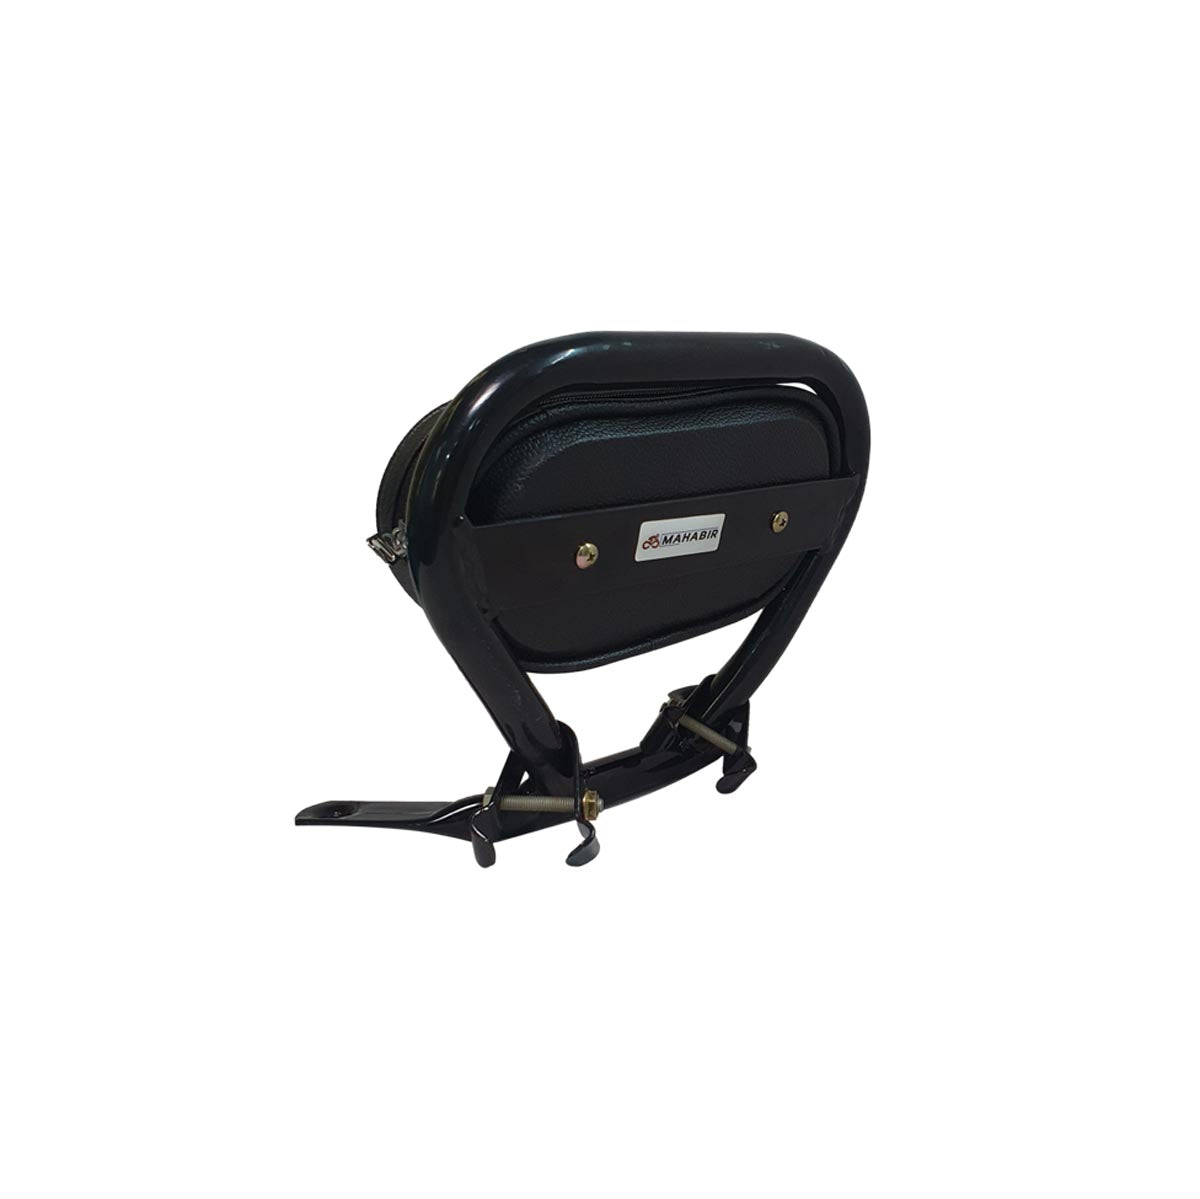 BACK REST ELECTRIC S1 PRO WITH CUSHIONING